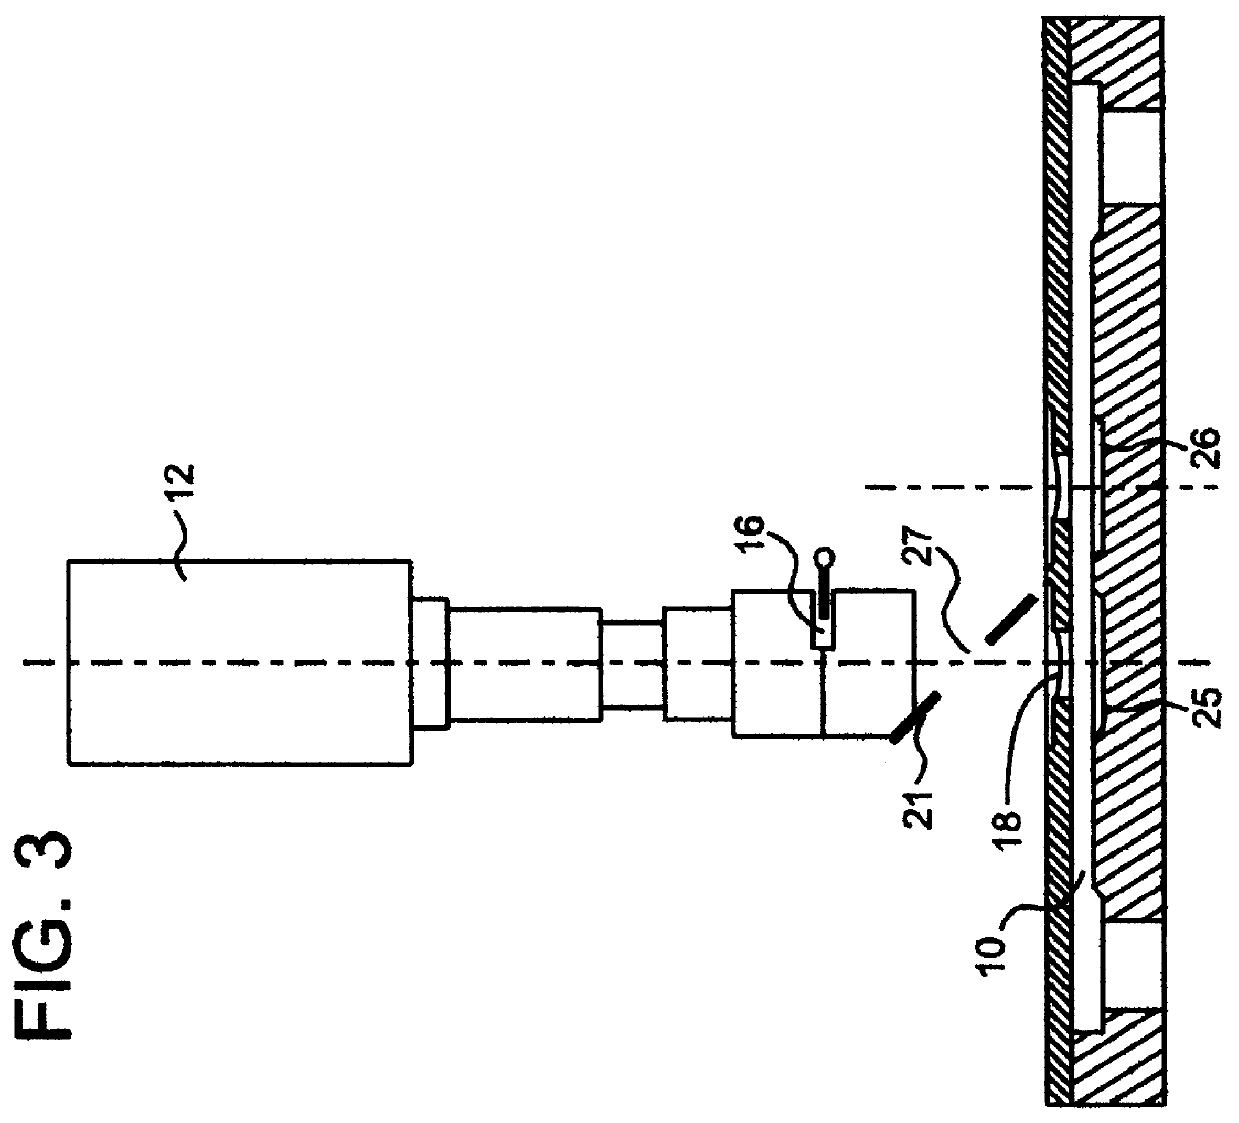 Process for regulating a paper pulp deinking line and device for continuously measuring the quantity of particles contained in a liquid